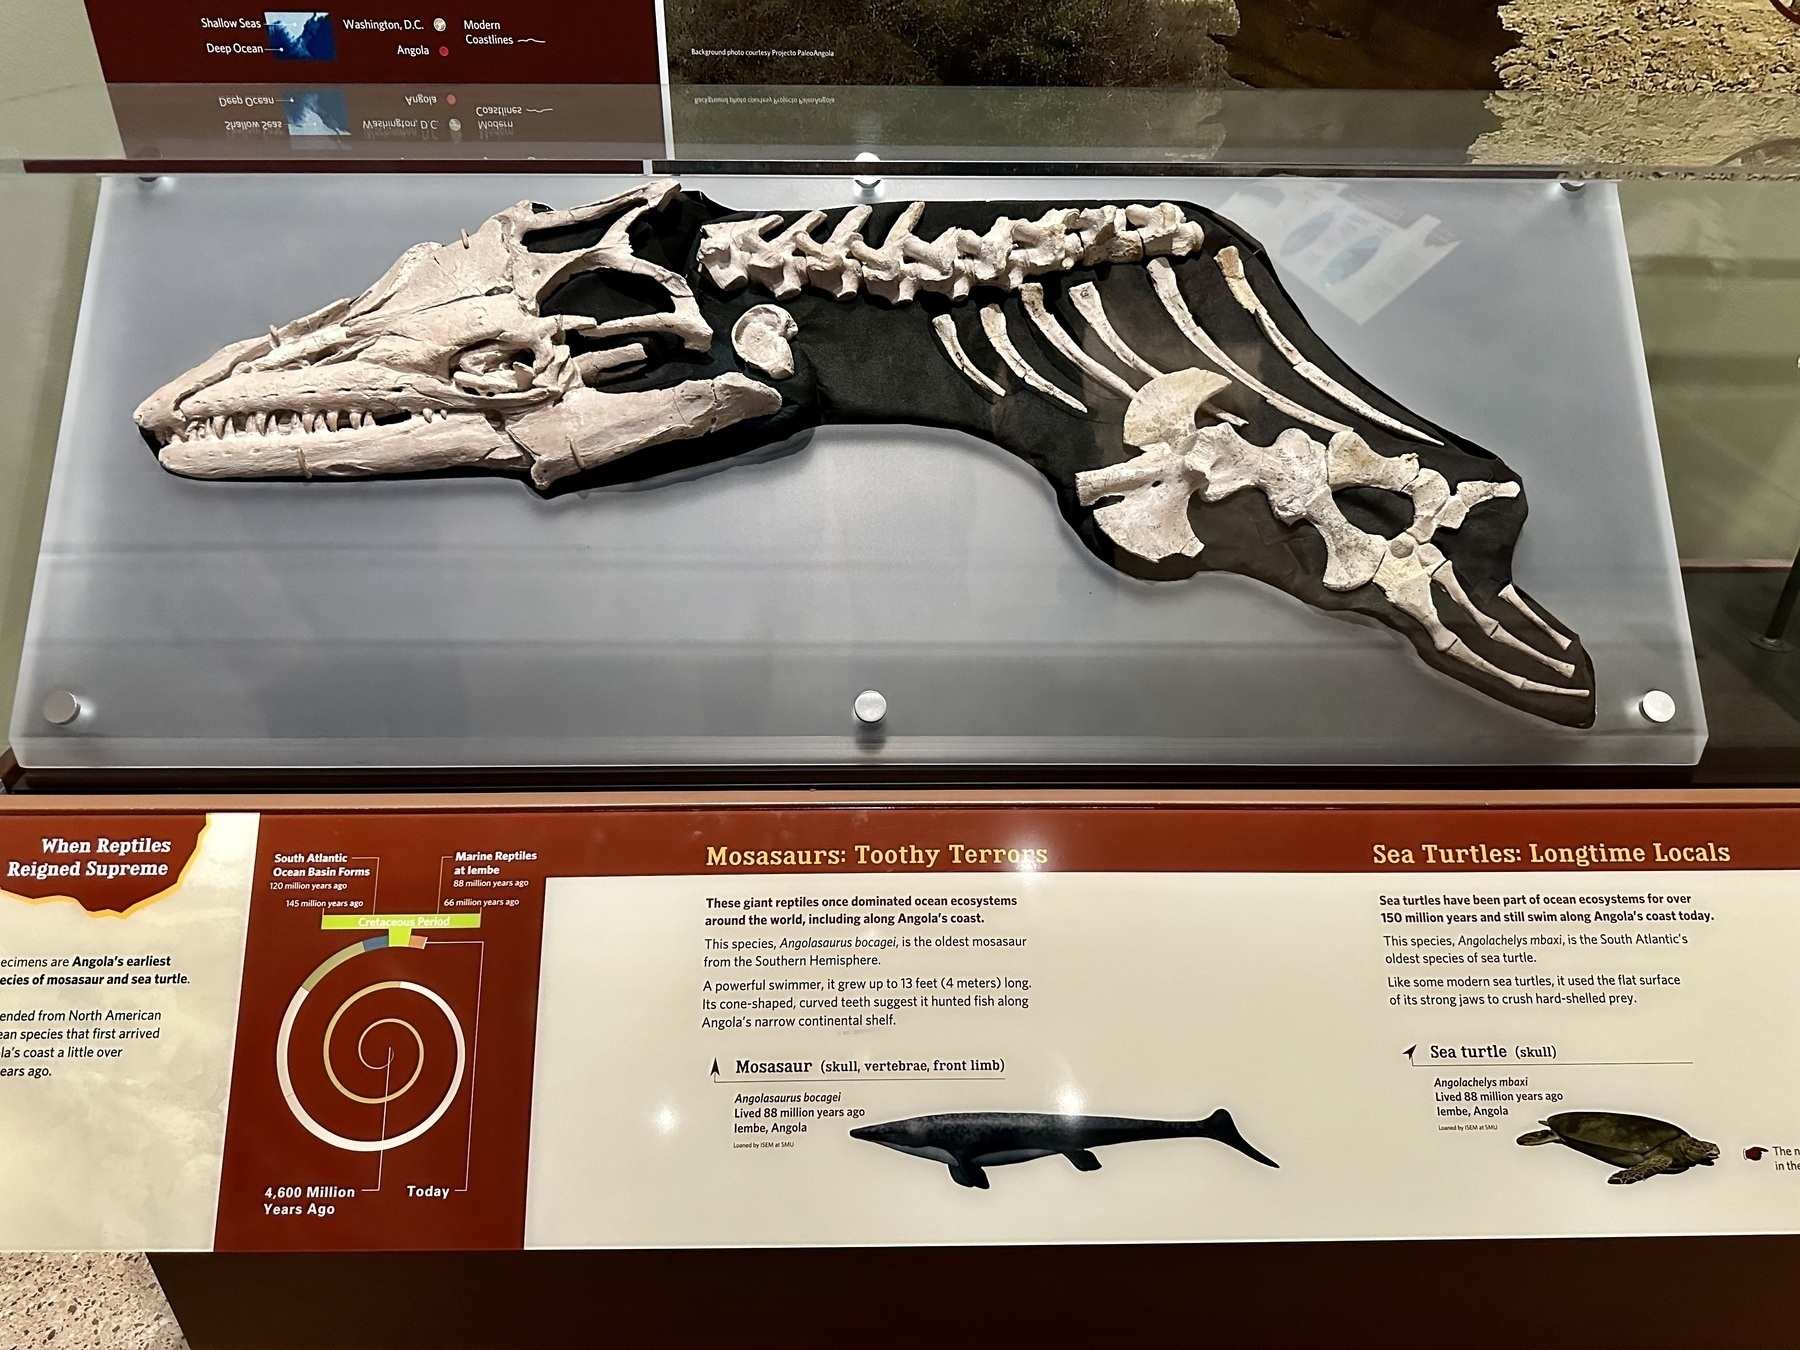 A reptilian skull, front limb and vertebrae in a glass case with a description of mosasaurus on a plaque underneath.